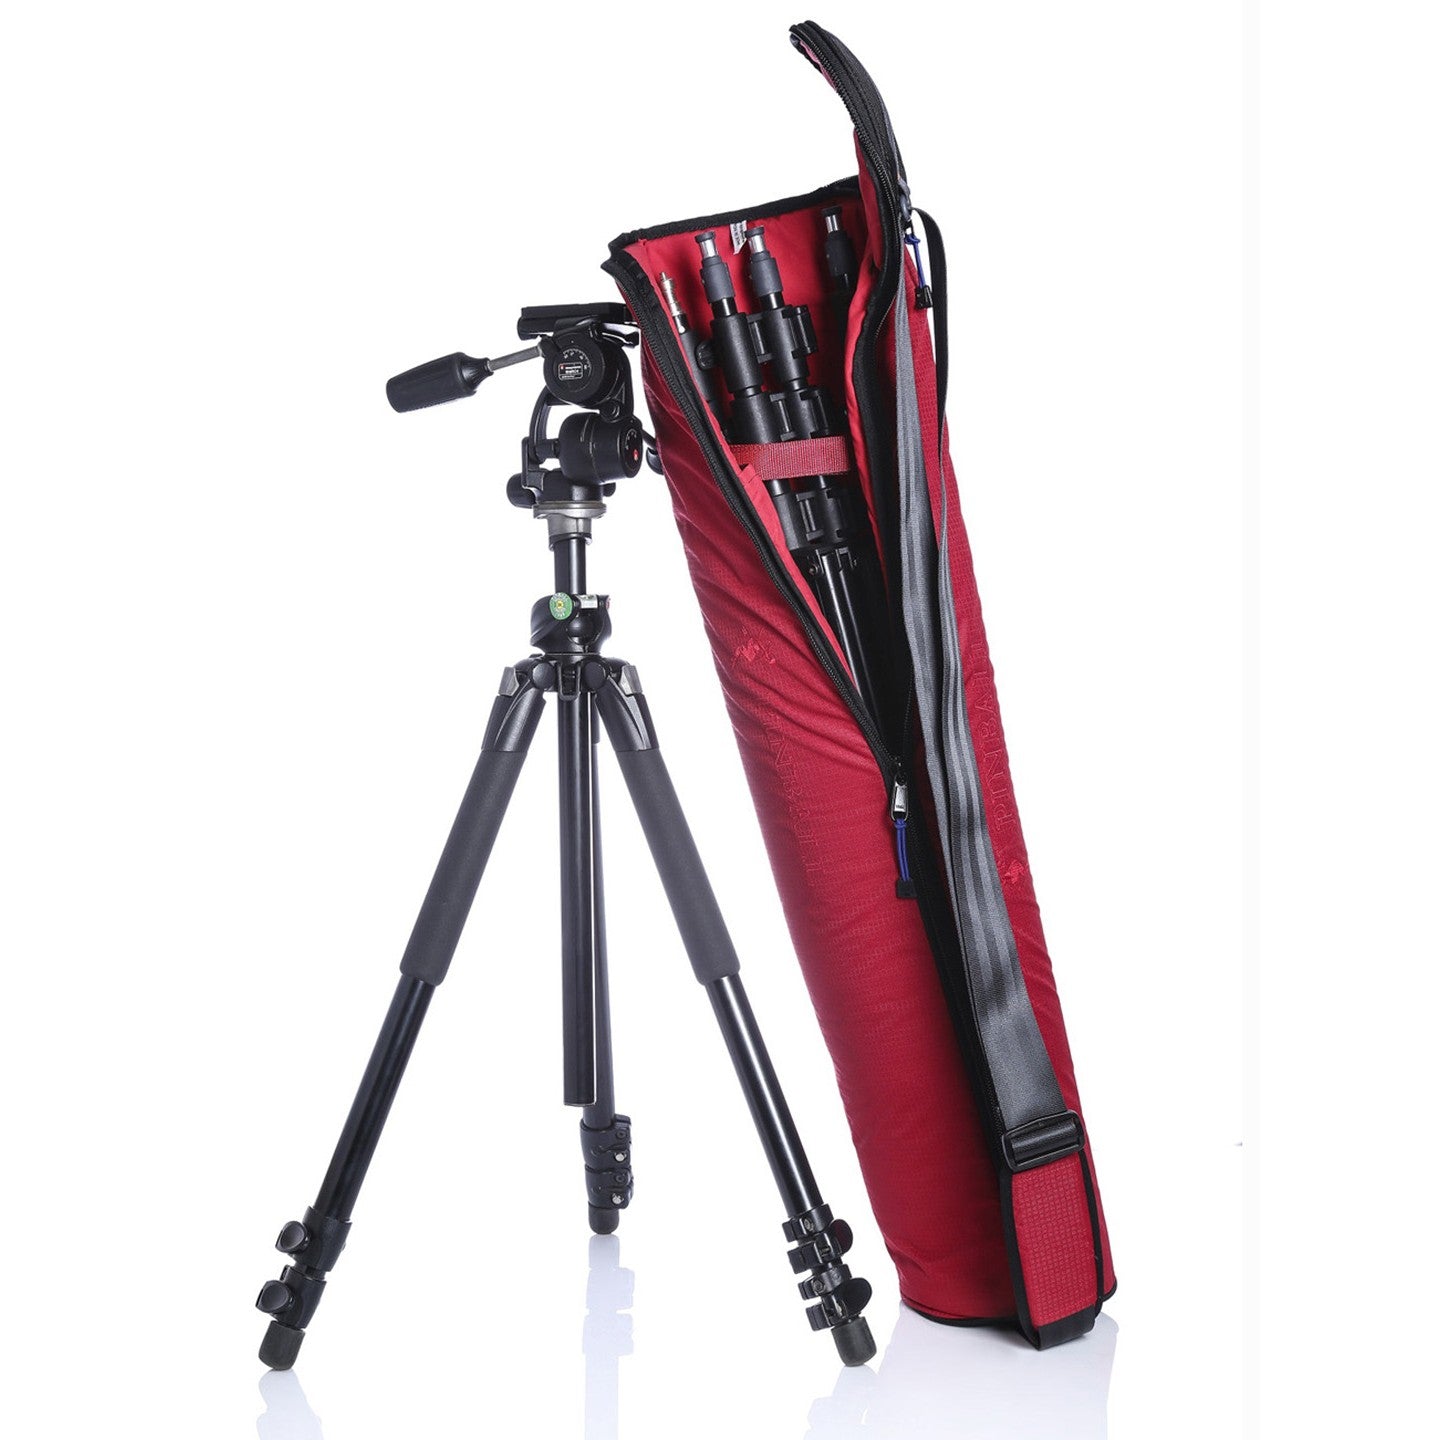 The Mario-2 sling bag from the game series is open, revealing its interior with three tripod stands neatly stored. Designed to accommodate multiple tripod stands, the bag showcases its organizational capabilities and secure storage. This specialized bag ensures that photographers and videographers can easily transport and access their tripod stands while on the go.